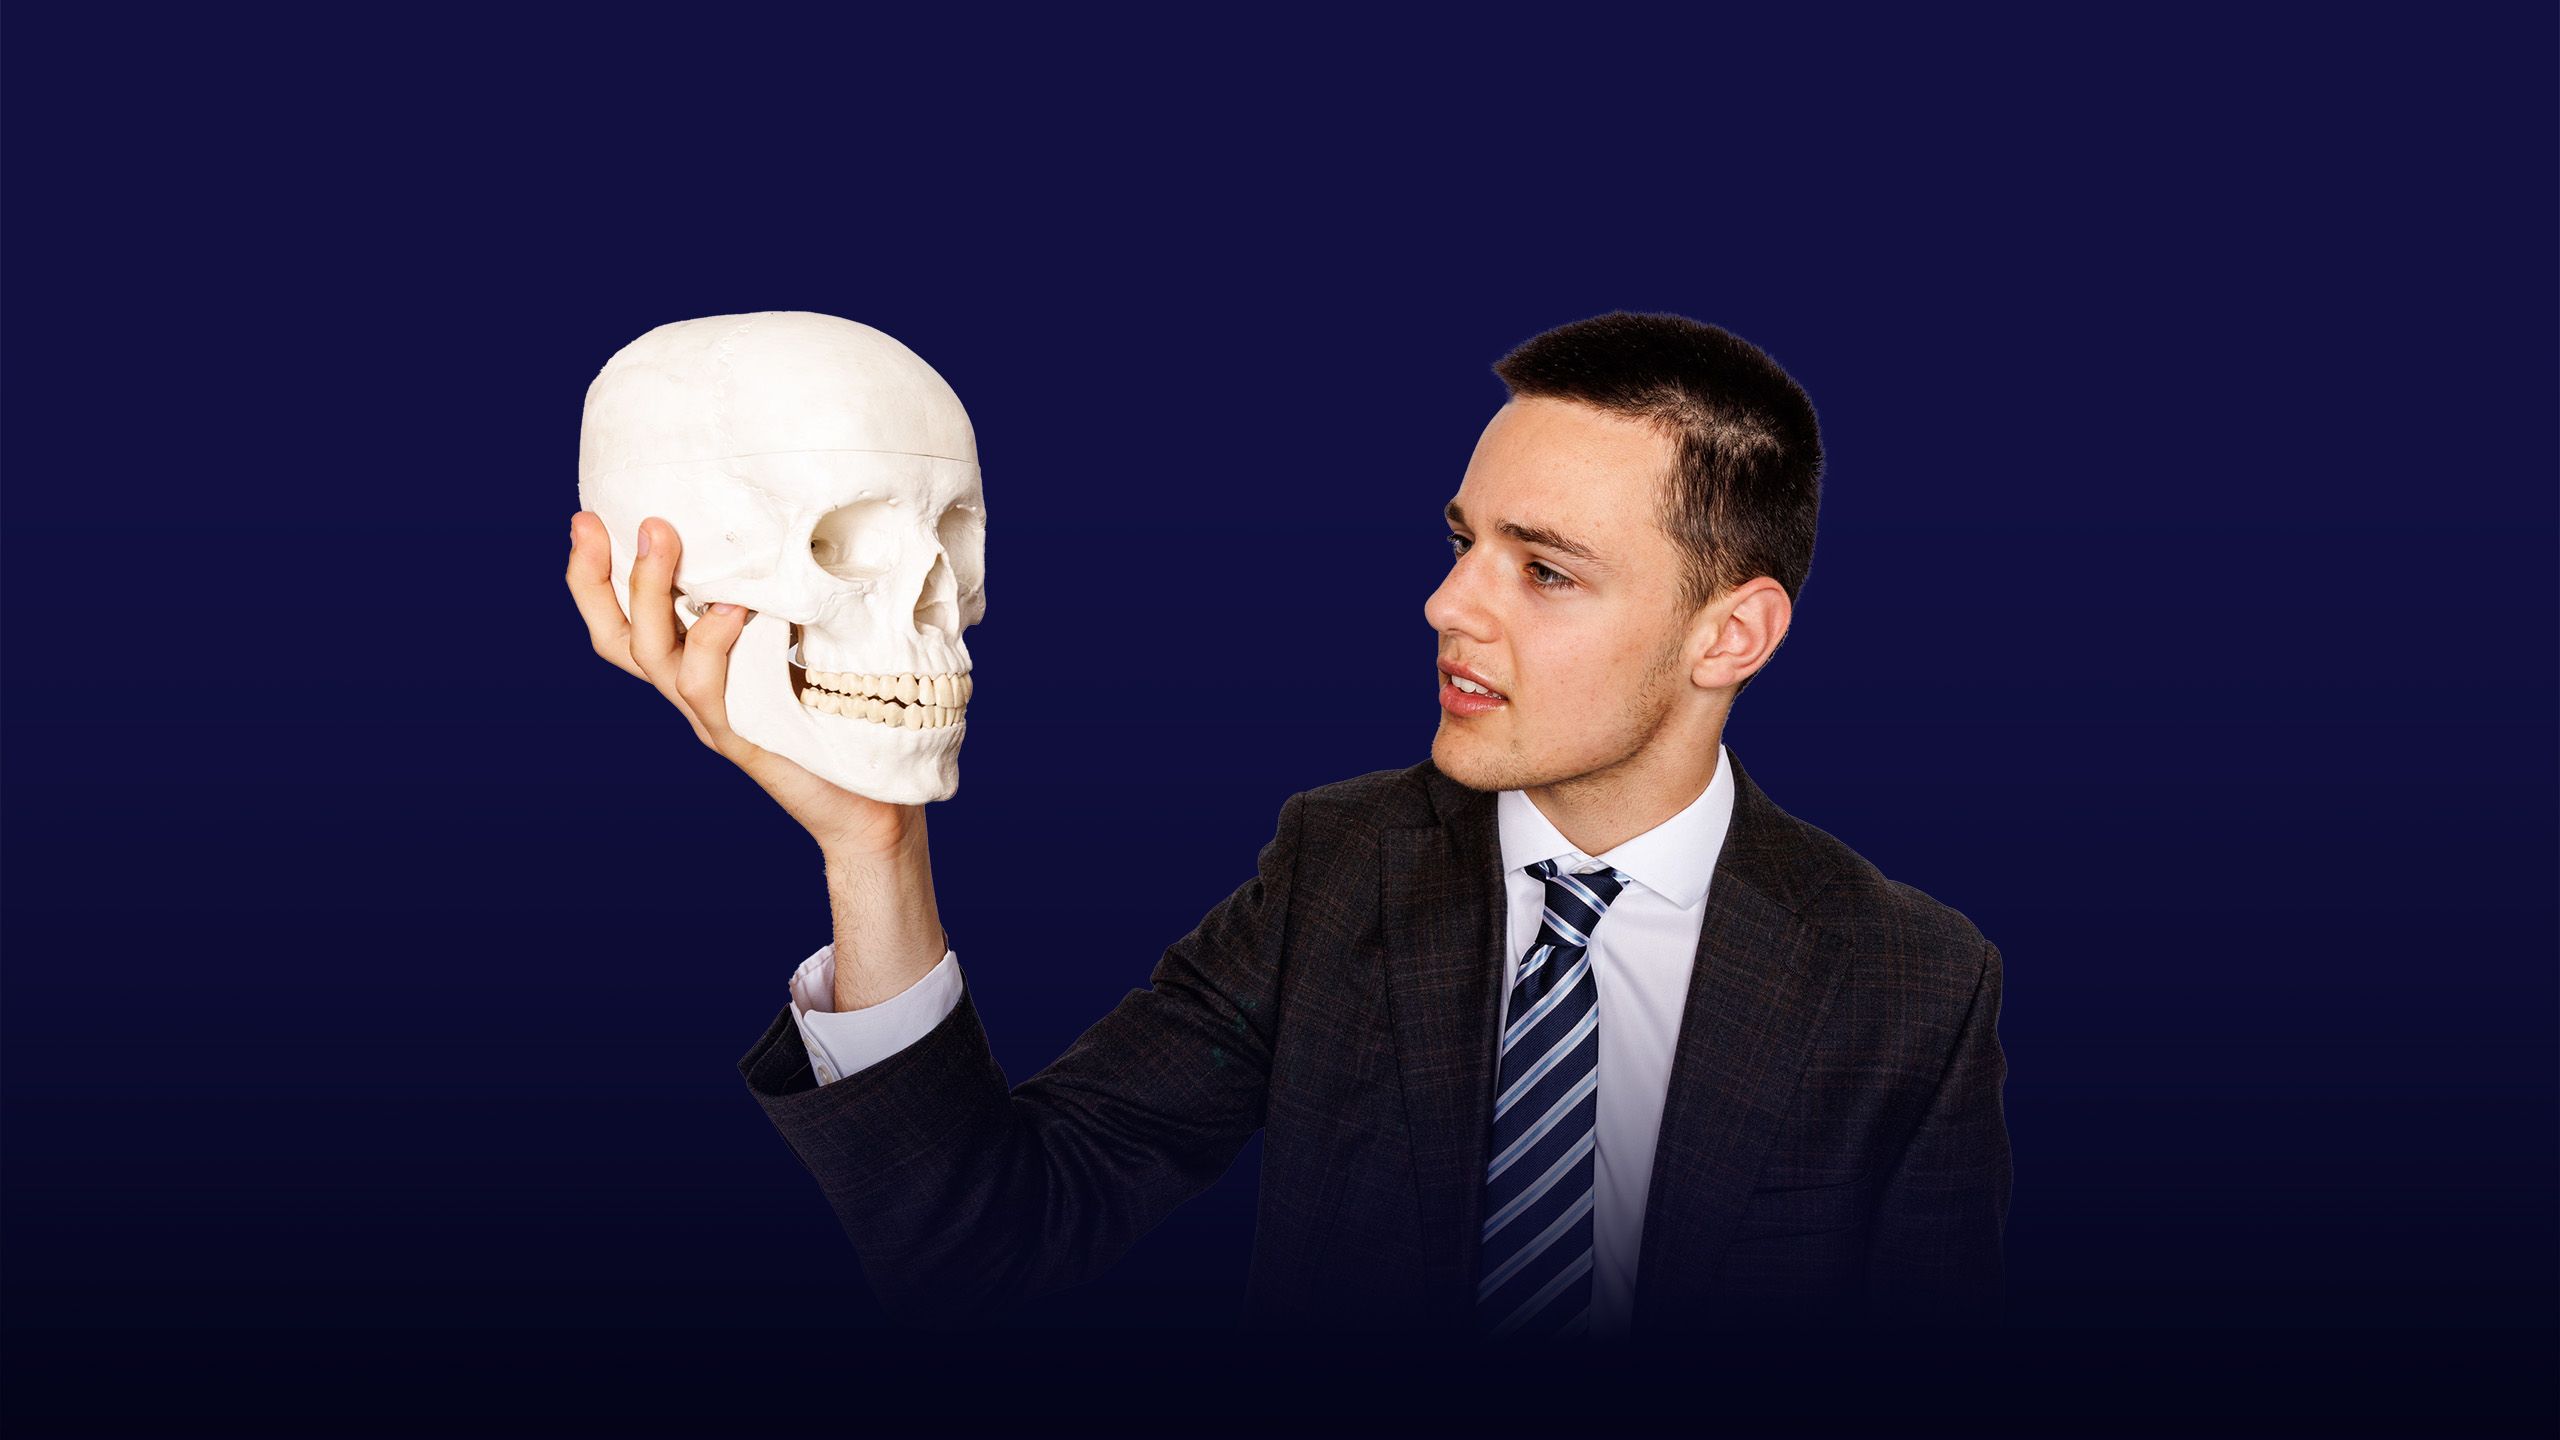 Image of a boy looking at a skeleton head he is holding with an overlay of the text "instilling values"